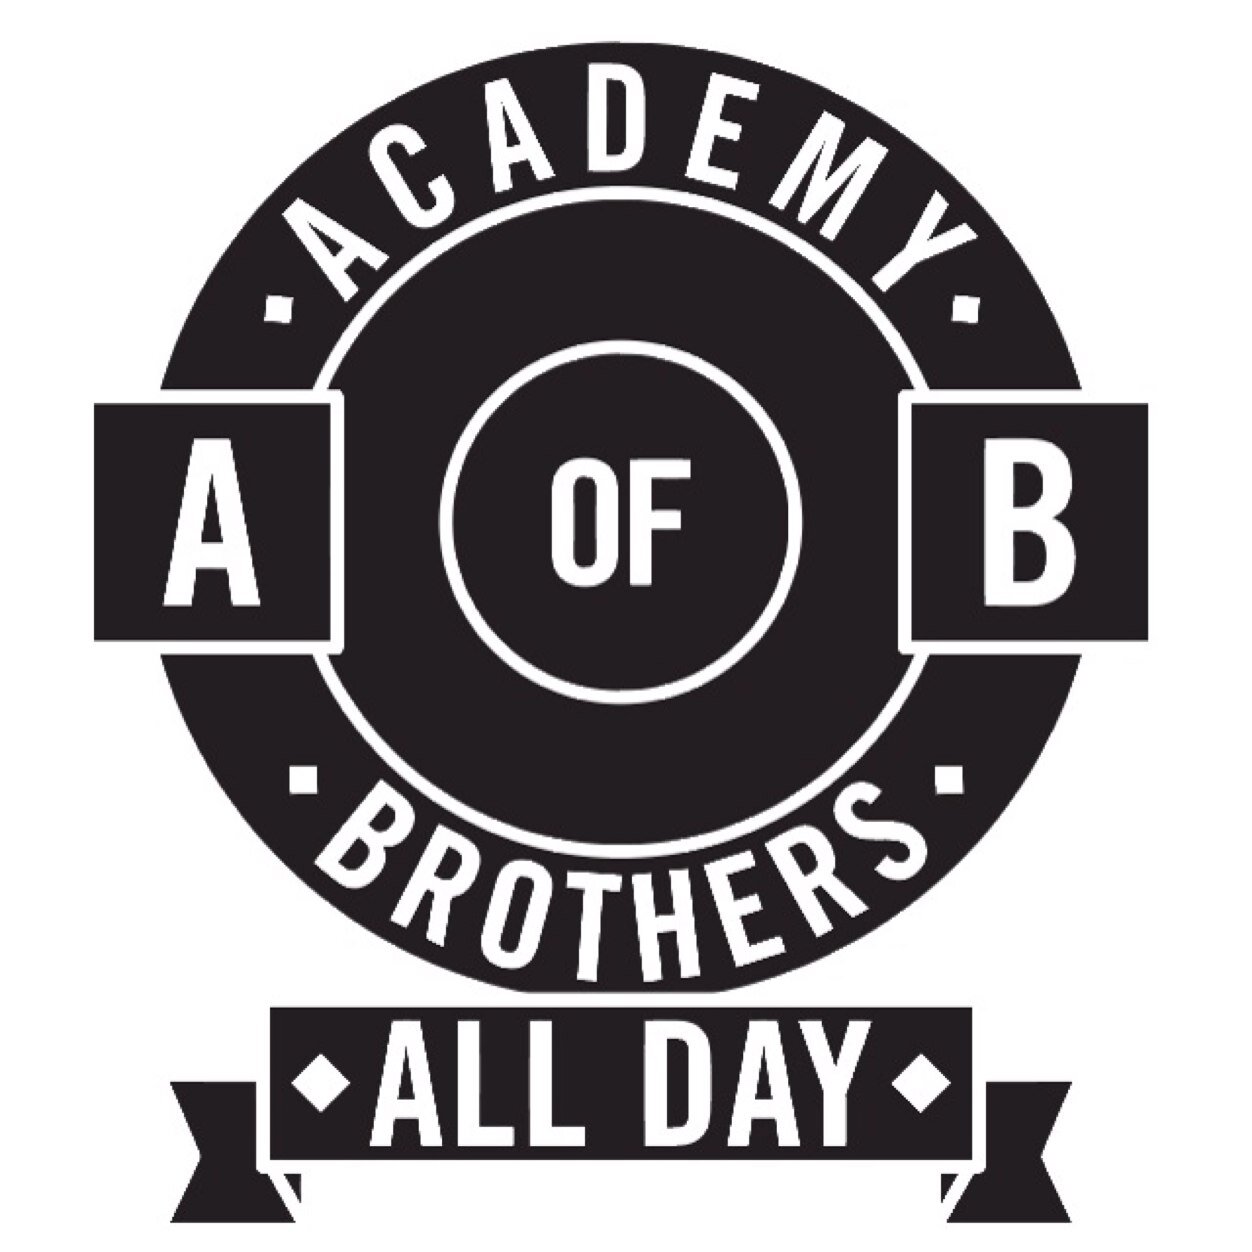 EST in 2011, Academy of Brothers is power house Mega Crew from Brisbane, Australia. AOB - Skool District #ALLDAYEVERYDAY